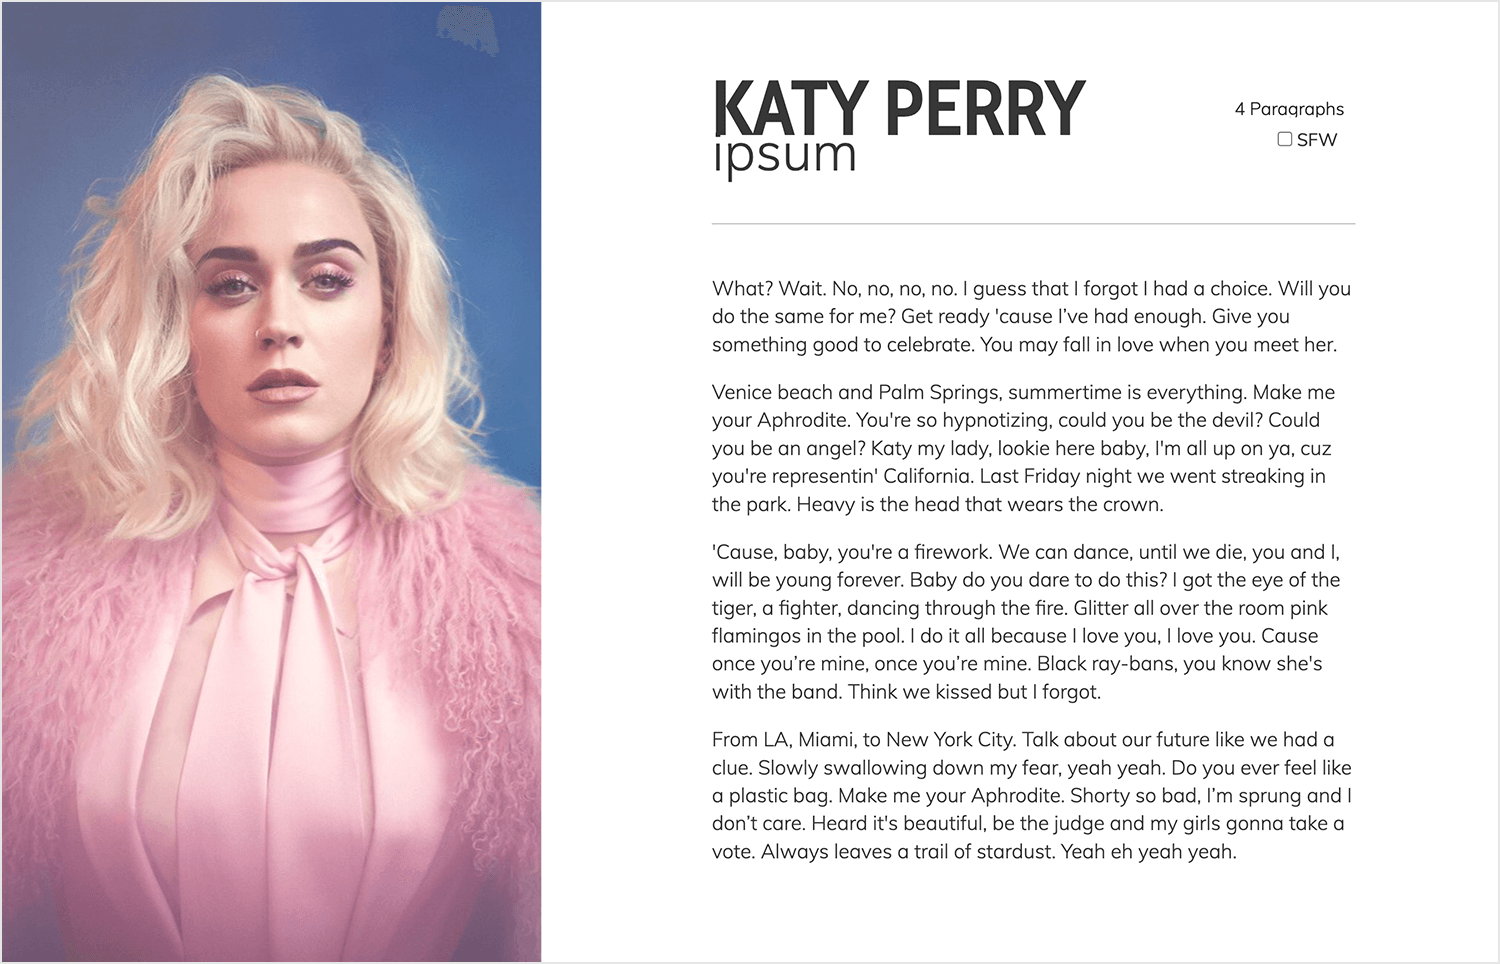 Katy Perry Lorem Ipsum alternative with lyrics and phrases from Katy Perry's songs